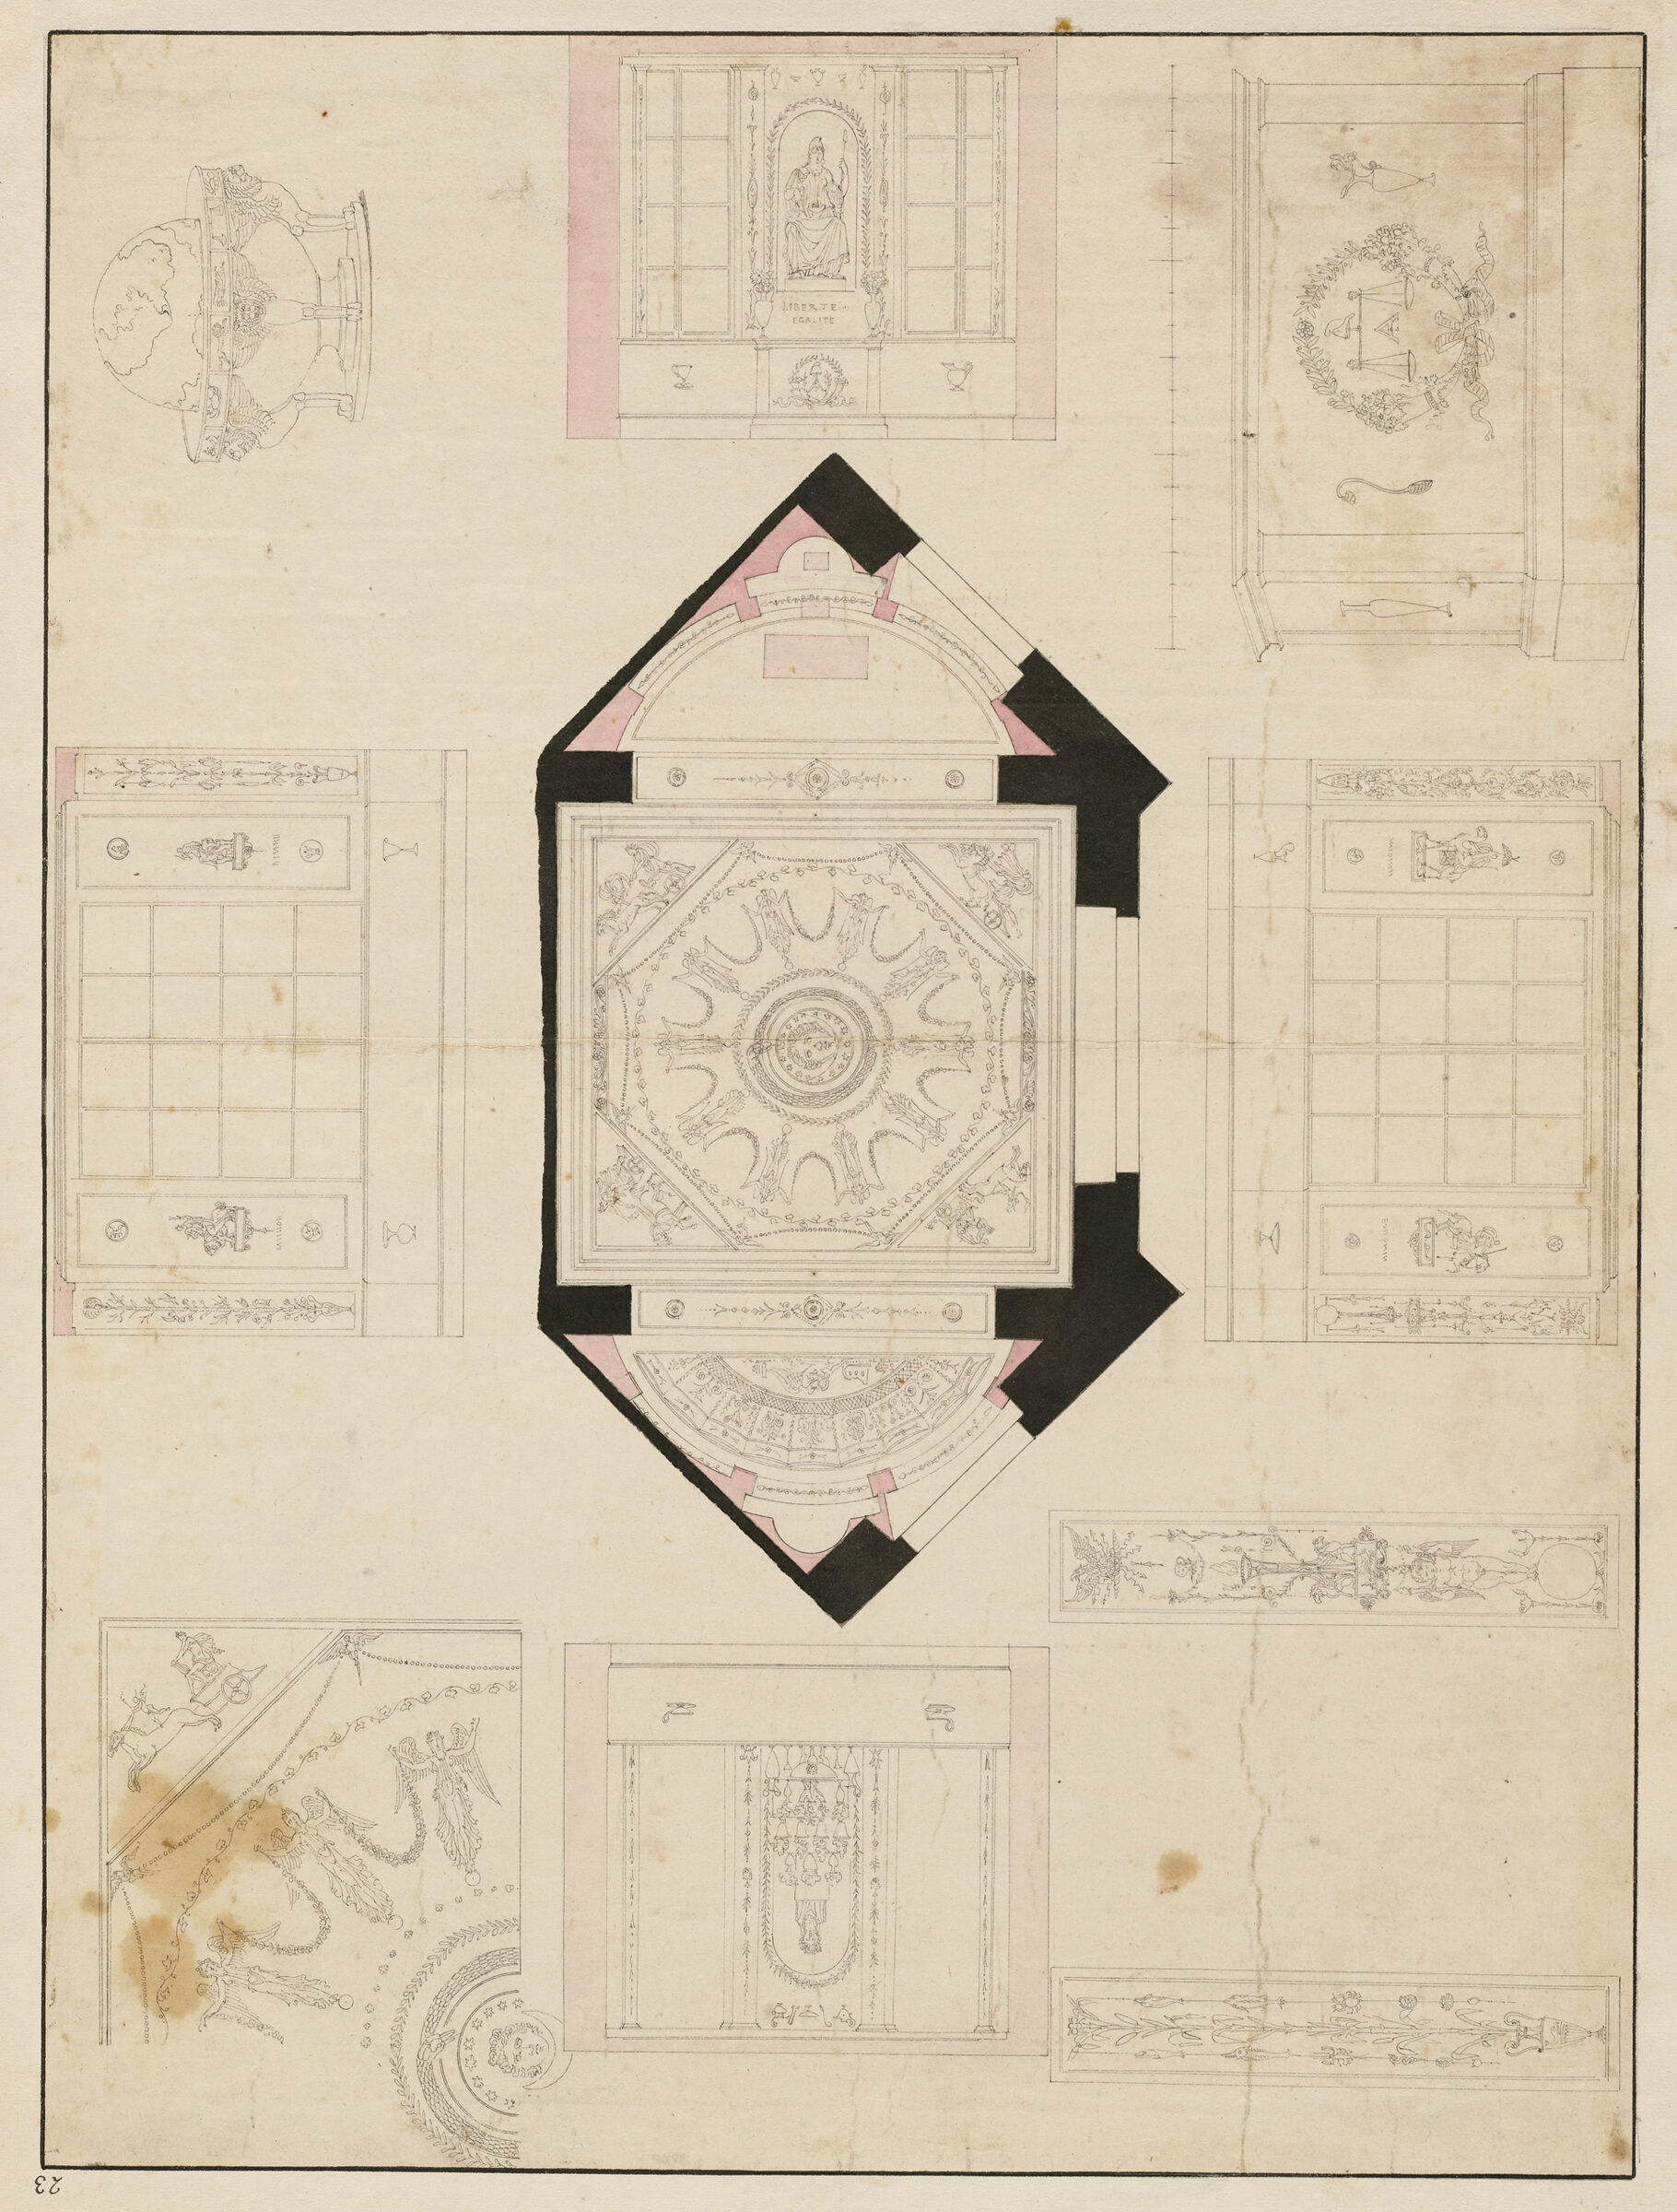 Elevation, Floor Plan, And Details Of A Room